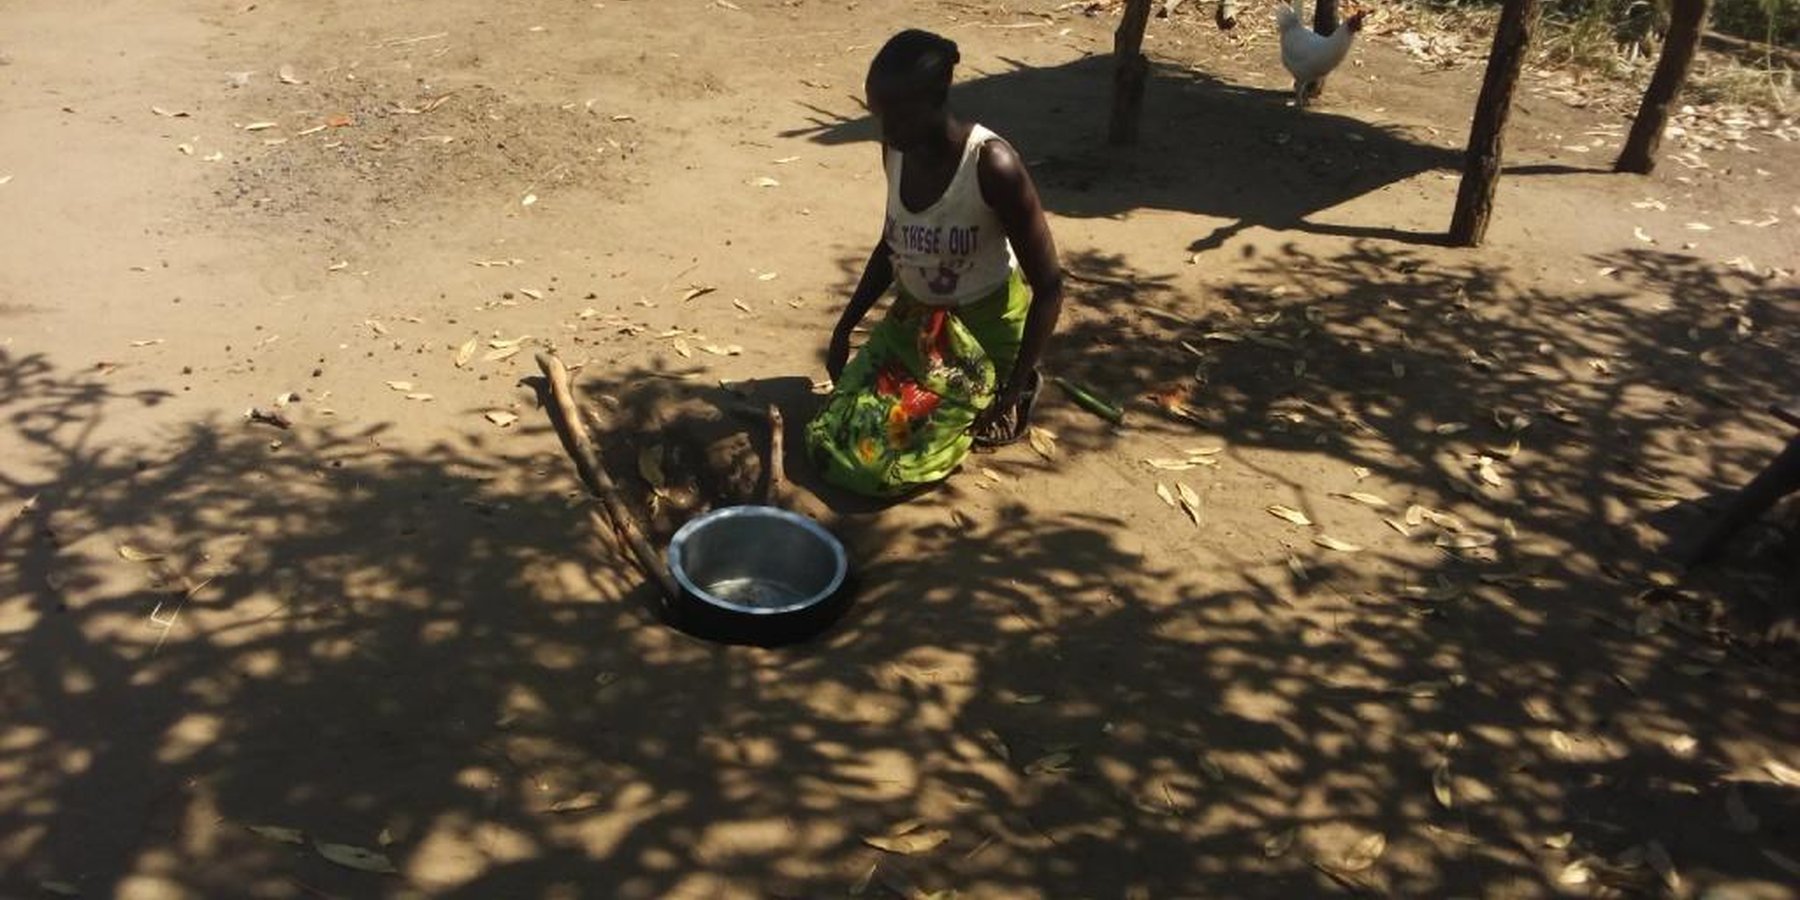 Wife of Odoch George preparing to boil water using ground stove.